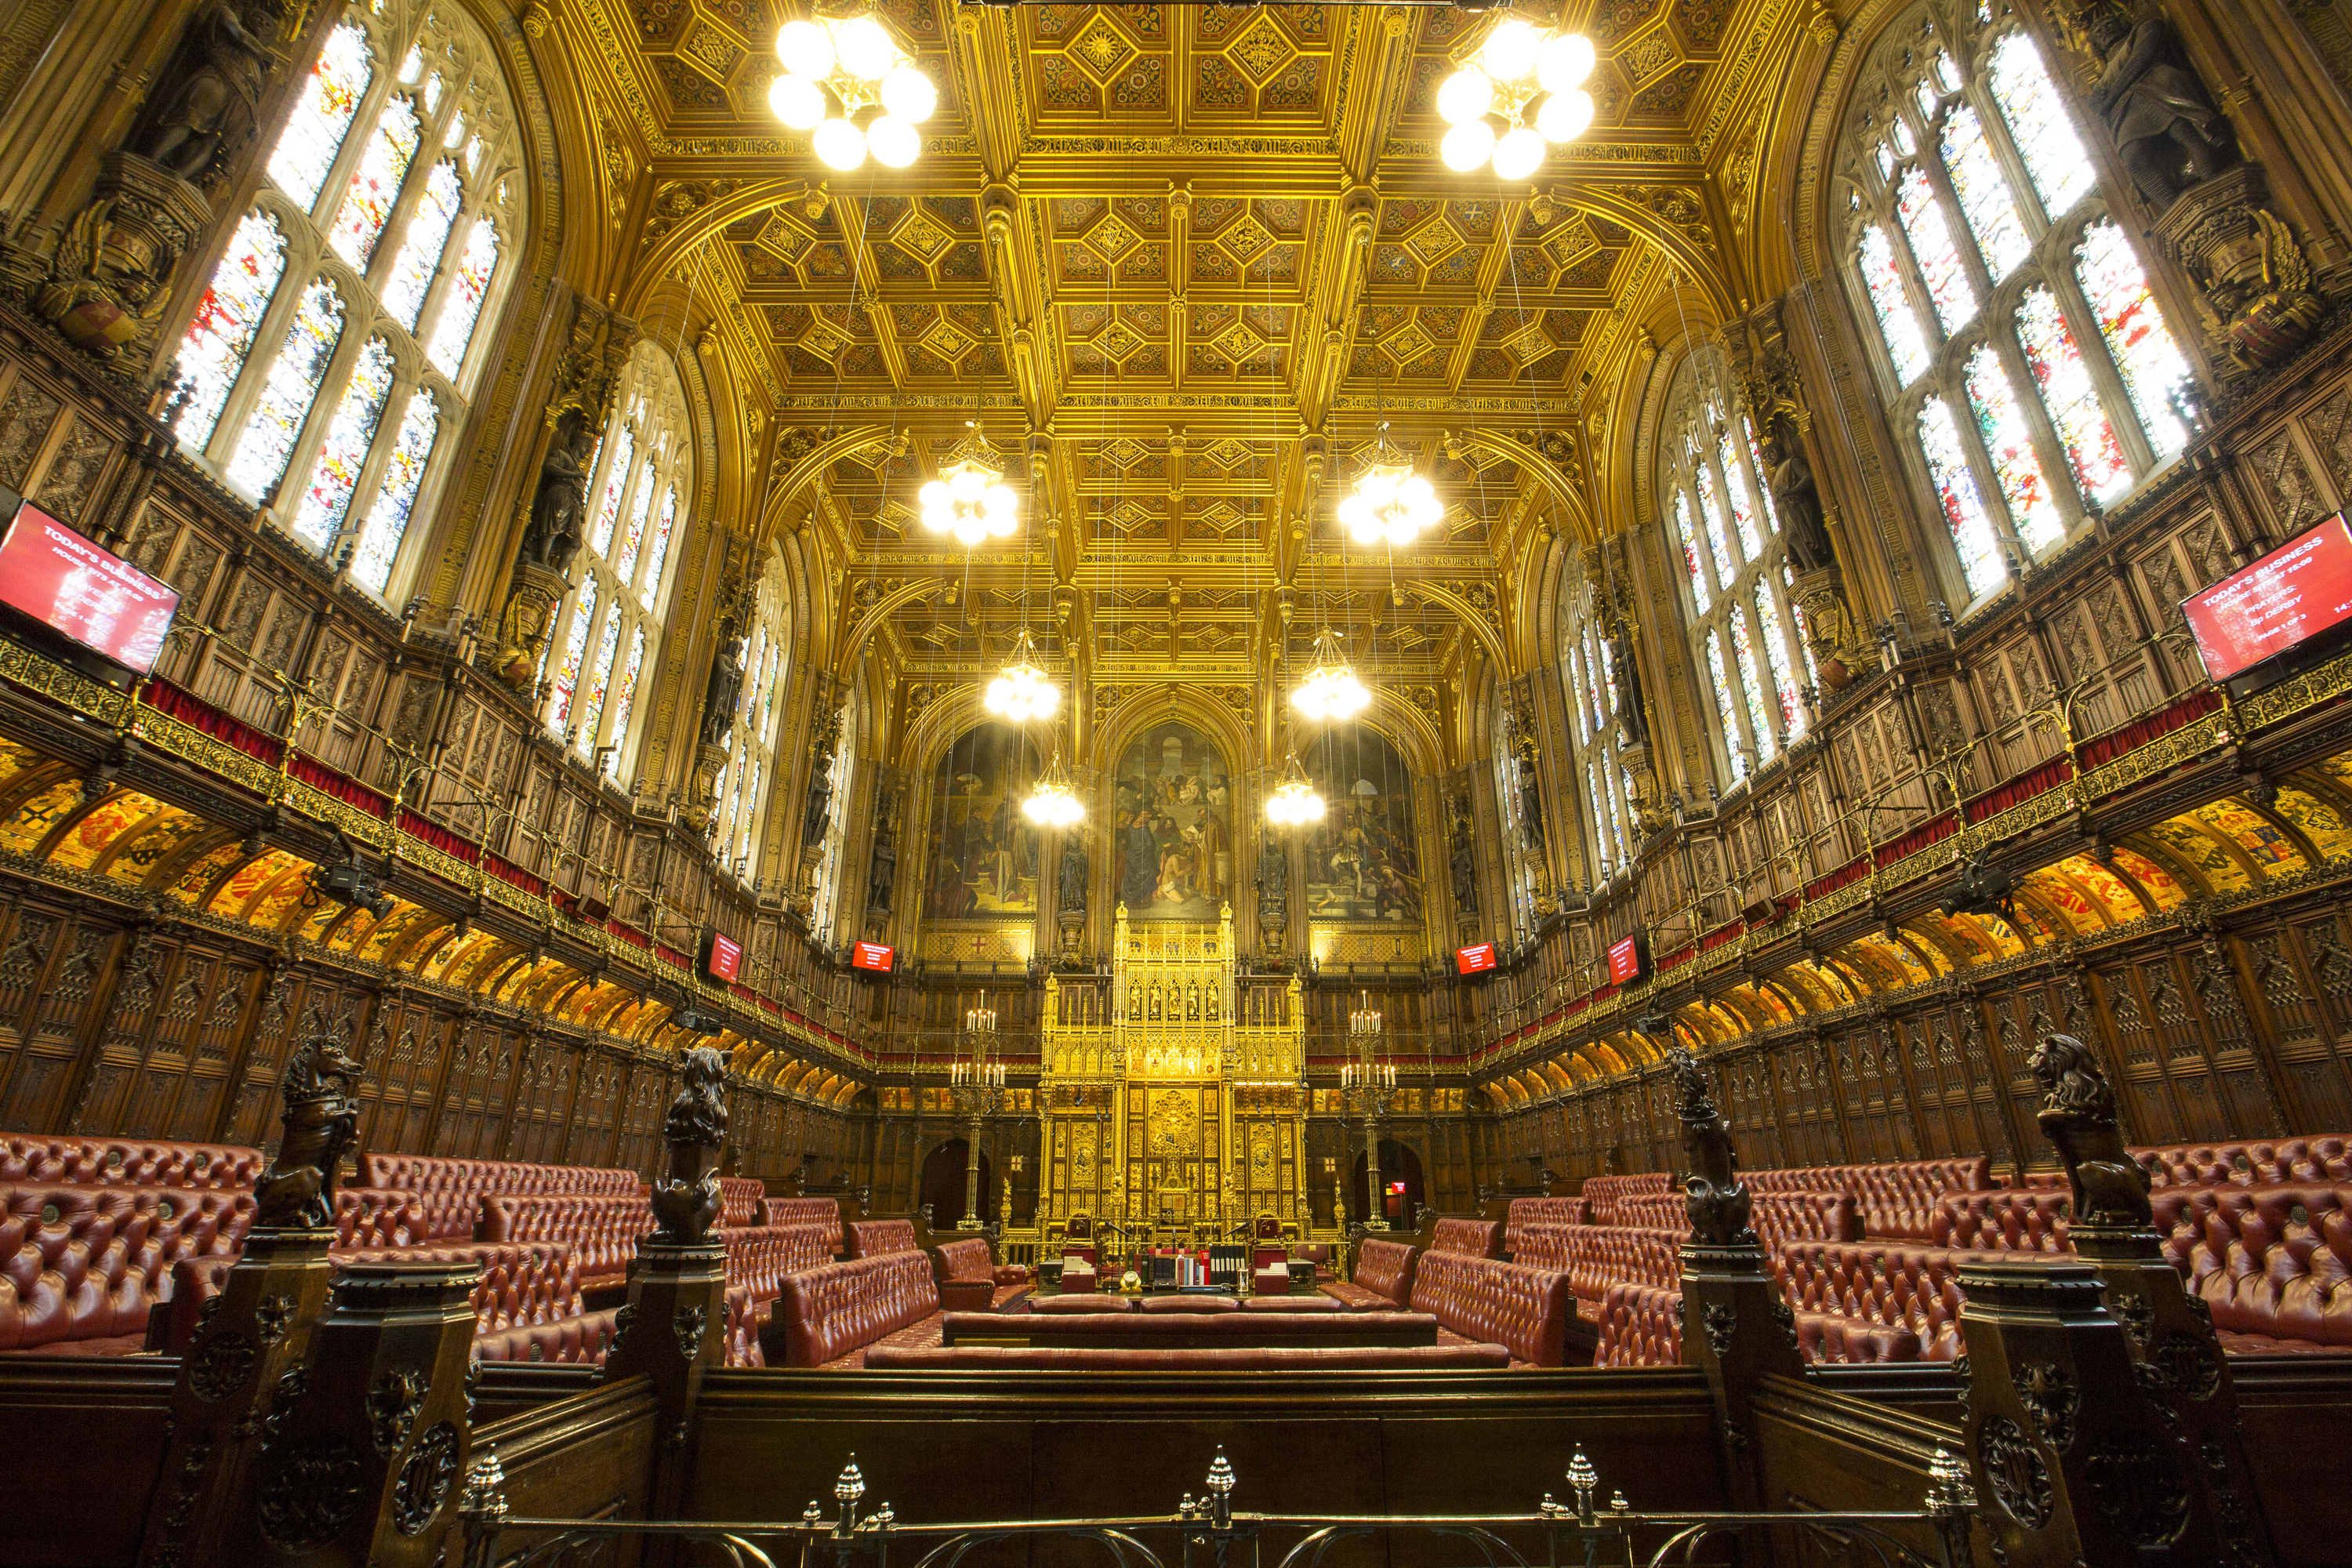 18 things you probably didn't know about the Palace of Westminster